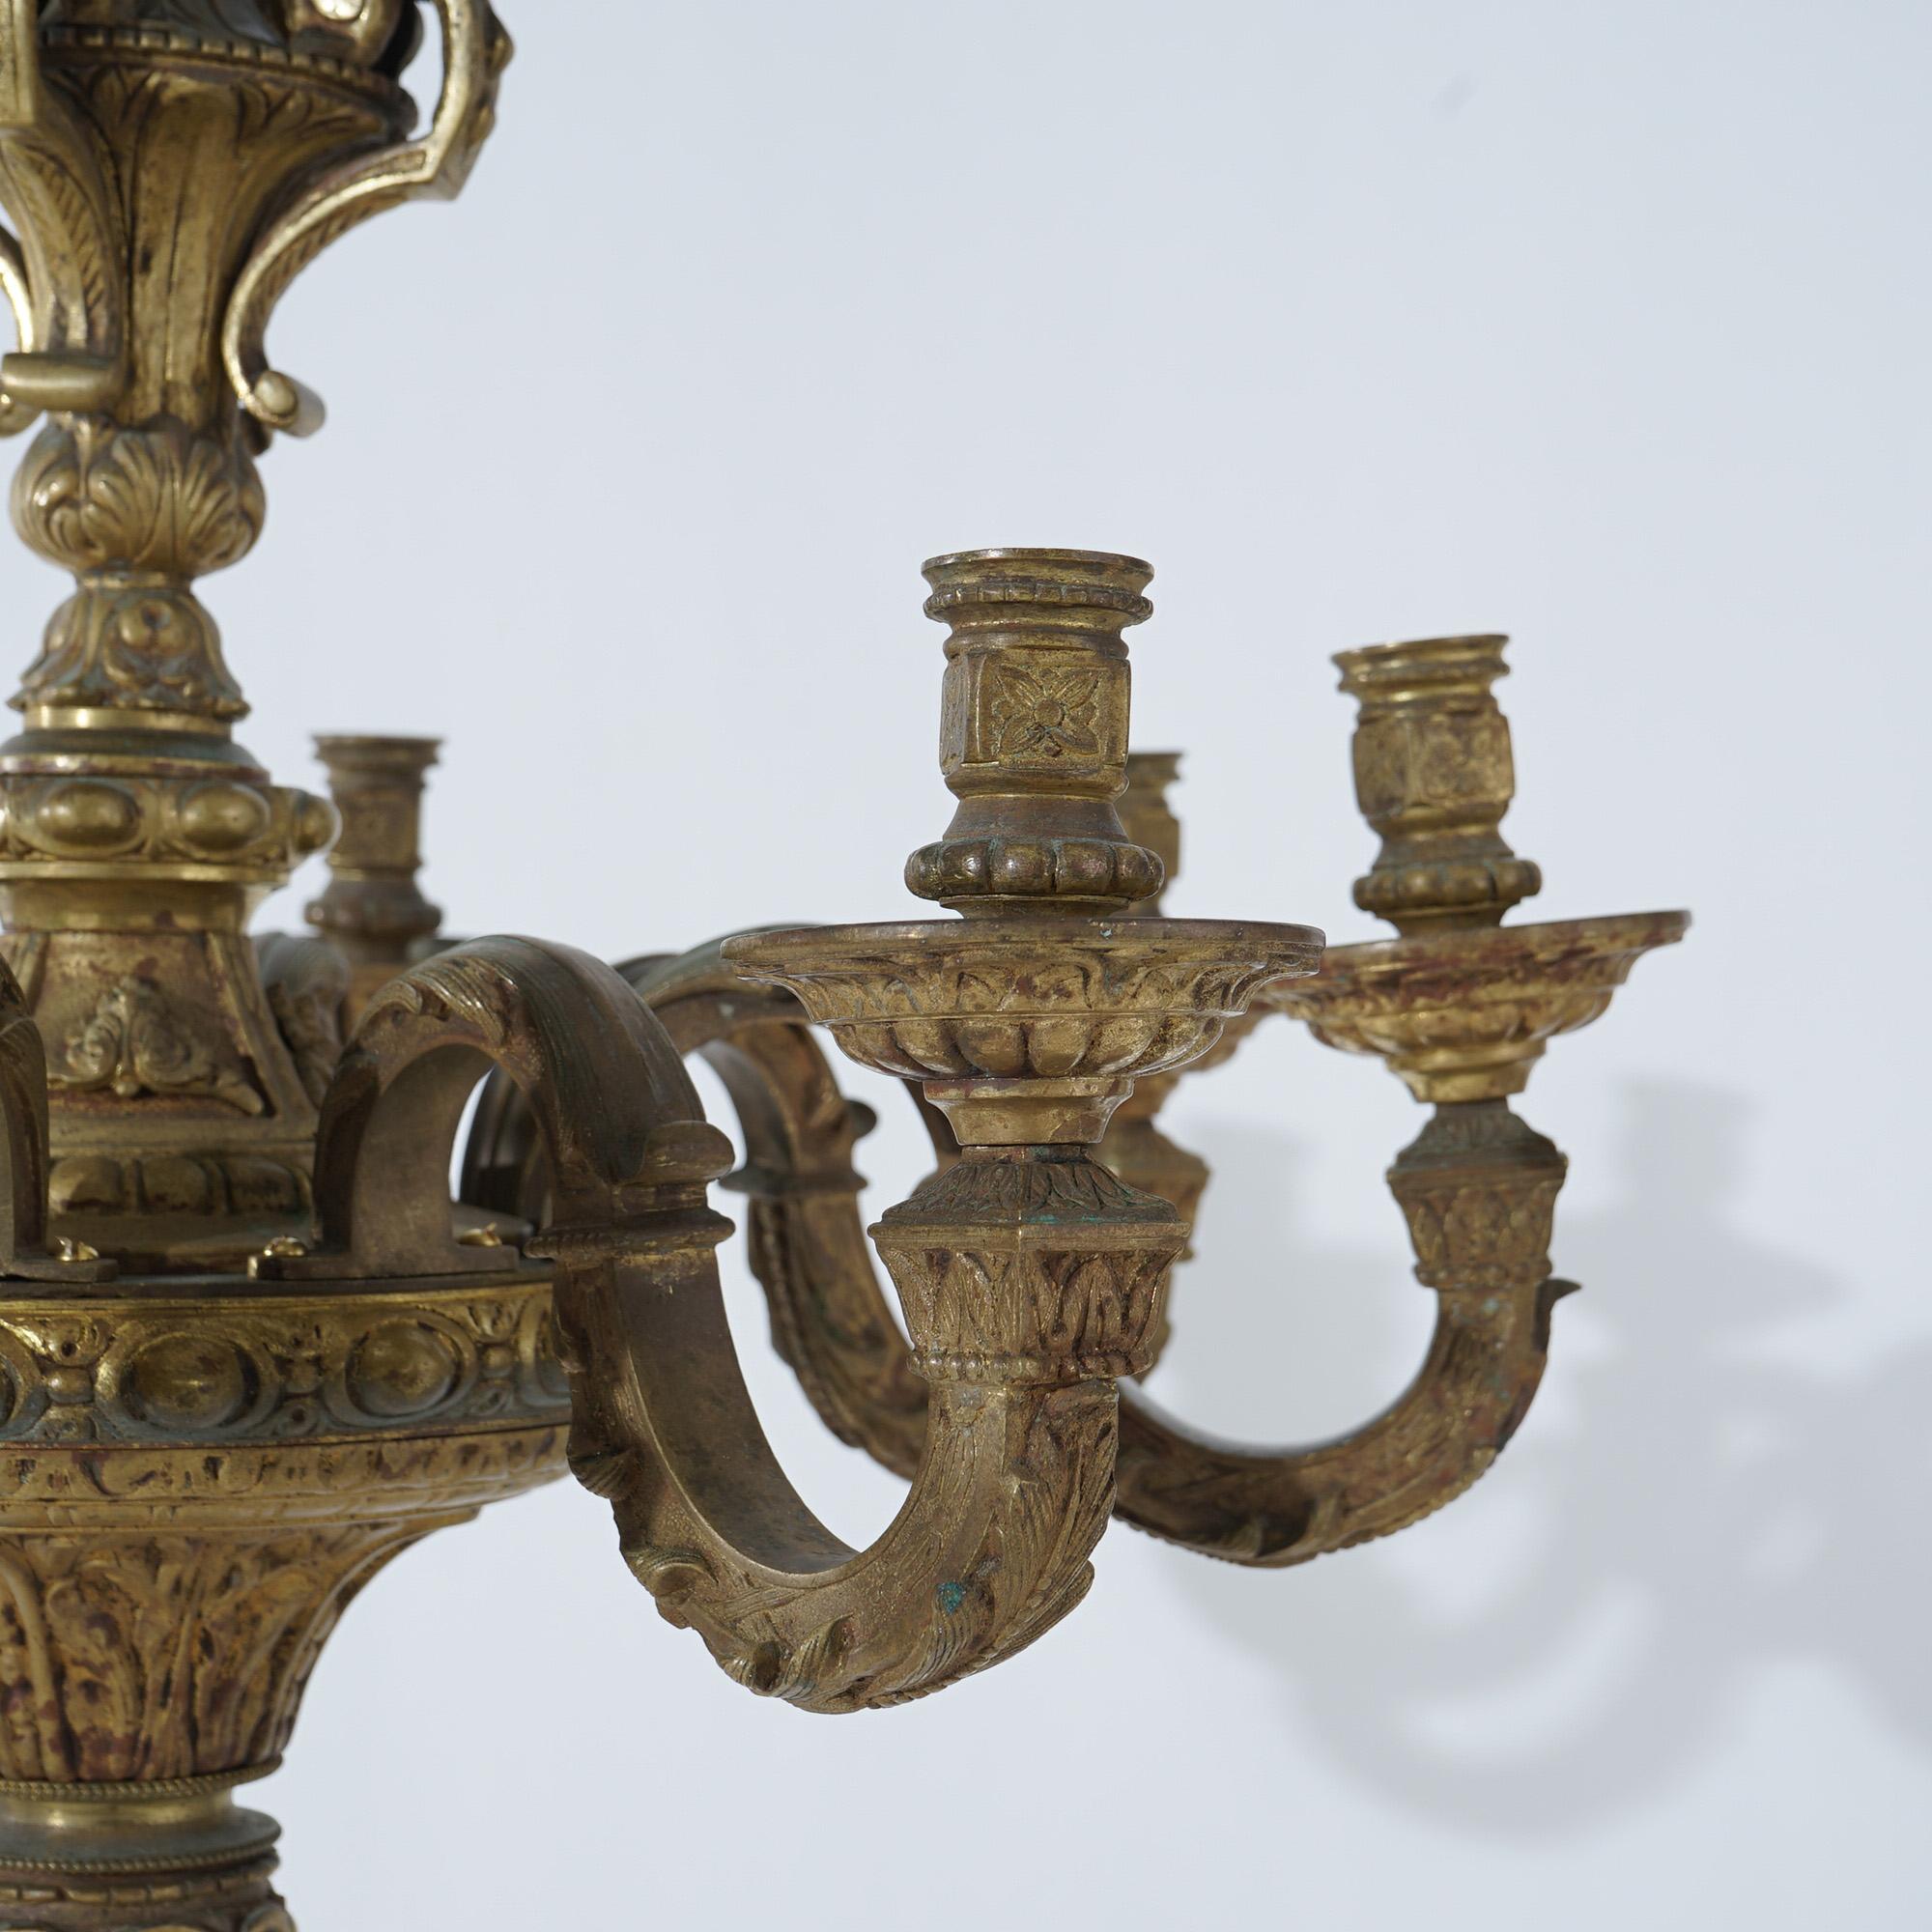 Carved Antique Caldwell French Louis XIV Figural 8-Light Candelabra Chandelier 19thC For Sale